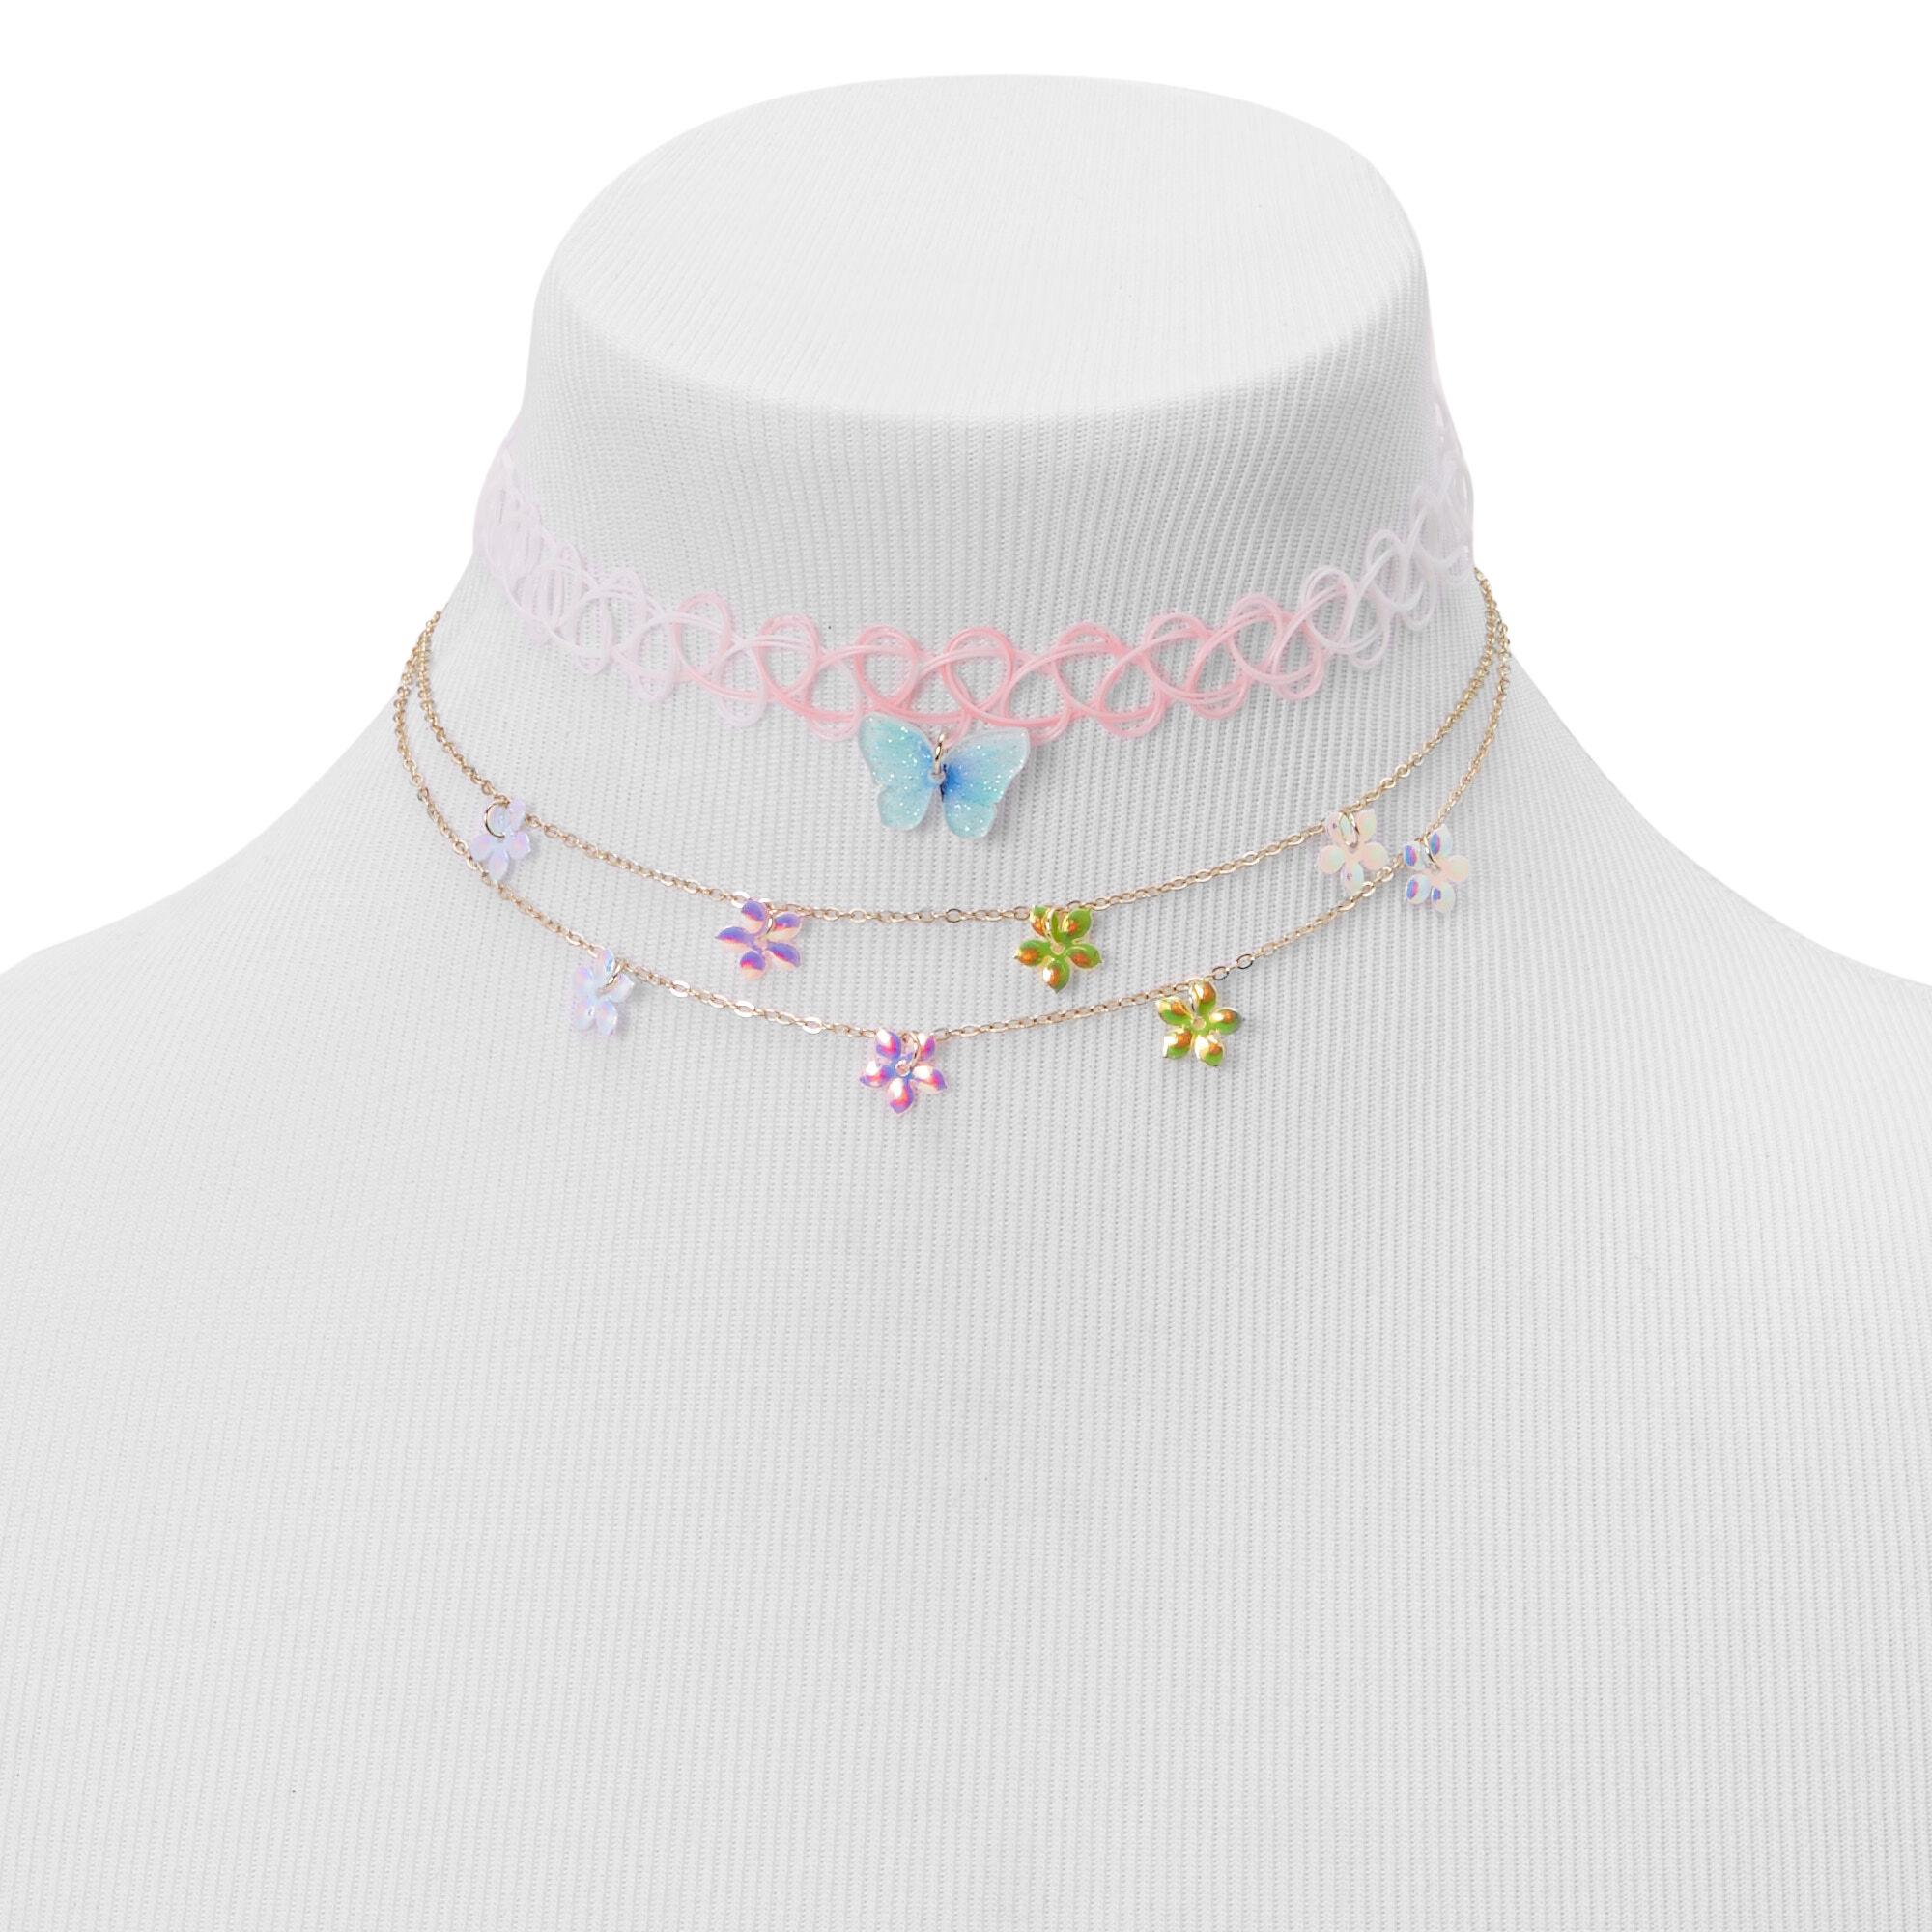 View Claires Club Floral Butterfly Choker Multi Strand Necklaces 2 Pack information